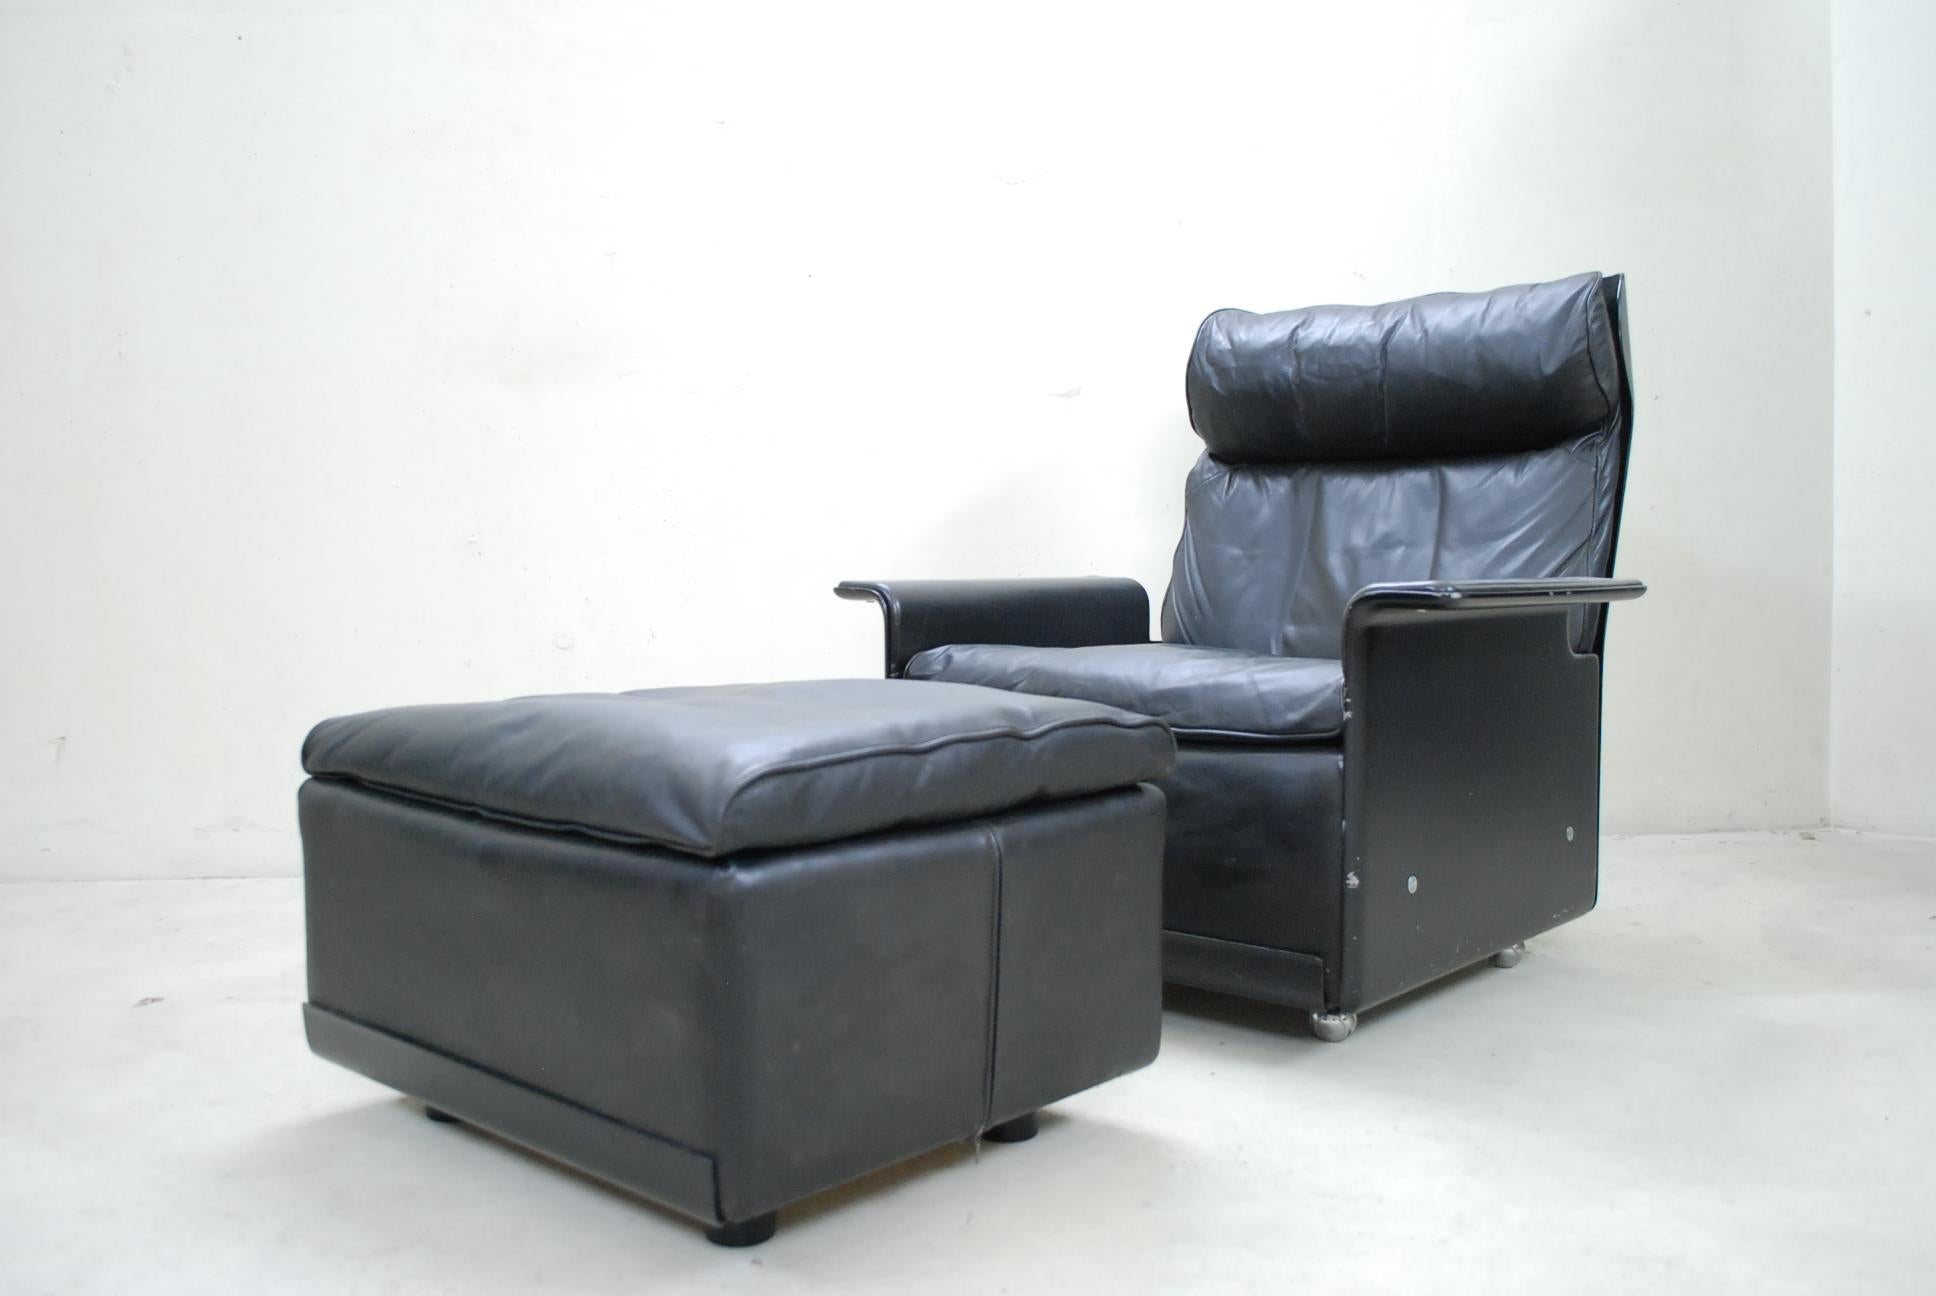 Dieter rams model 620 lounge chair and ottoman manufactured by Vitsoe.
It´s the 1st Version with the whole back.
Black aniline leather.
Great comfort.

Dimensions:
Armchair
Width 86 cm
Depth 80 cm
Height 90 cm
Seat height 40